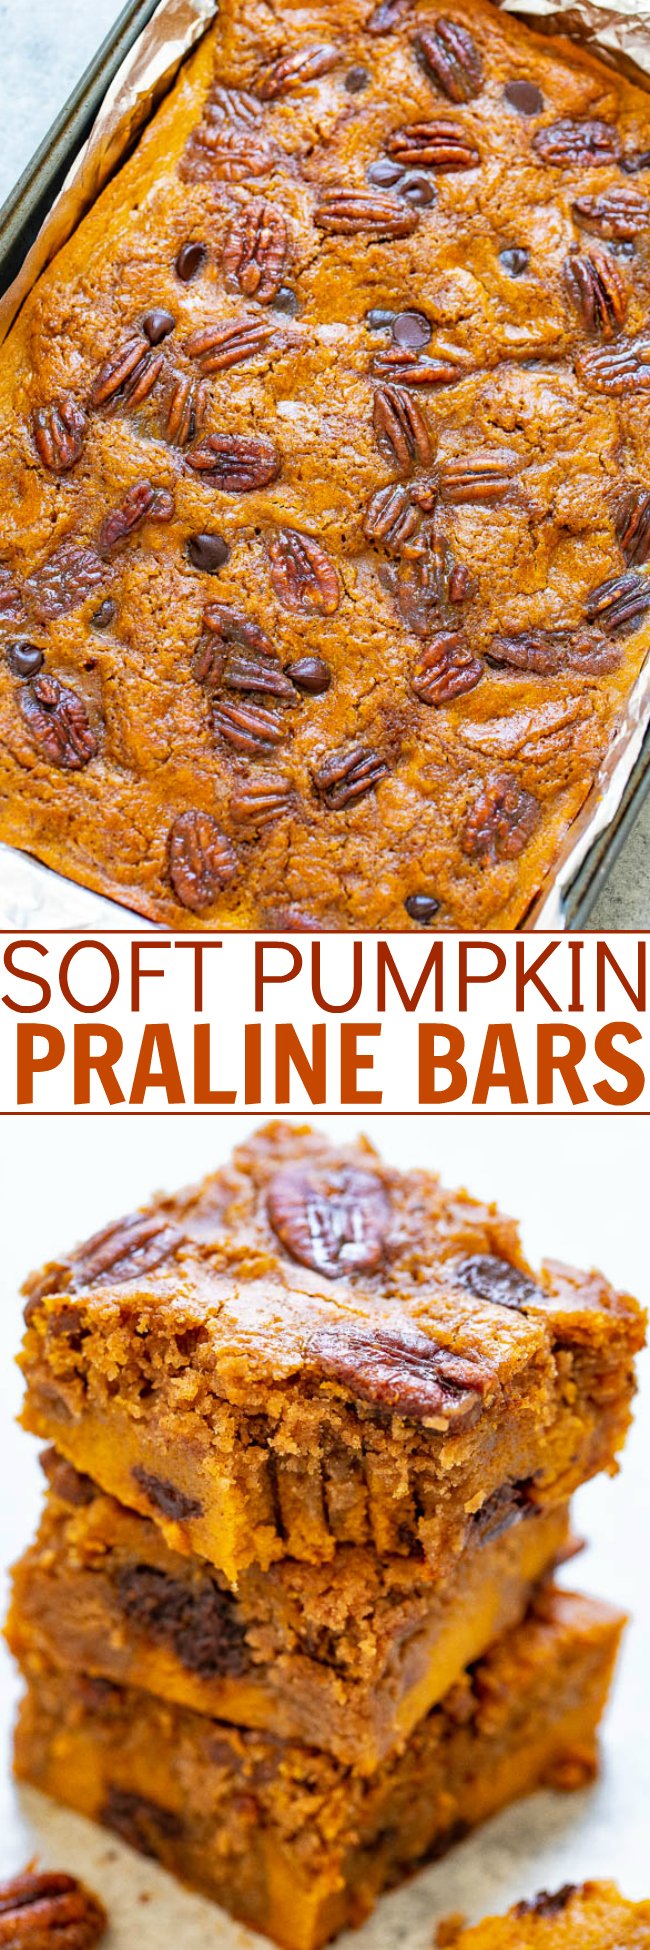 Soft Praline Pumpkin Bars (with Cake Mix!) — SUPER soft pumpkin bars studded with chocolate chips, candied pecans, and plenty of pumpkin pie spice!! A FAST and EASY dessert that feeds a crowd for your fall and winter celebrations!!